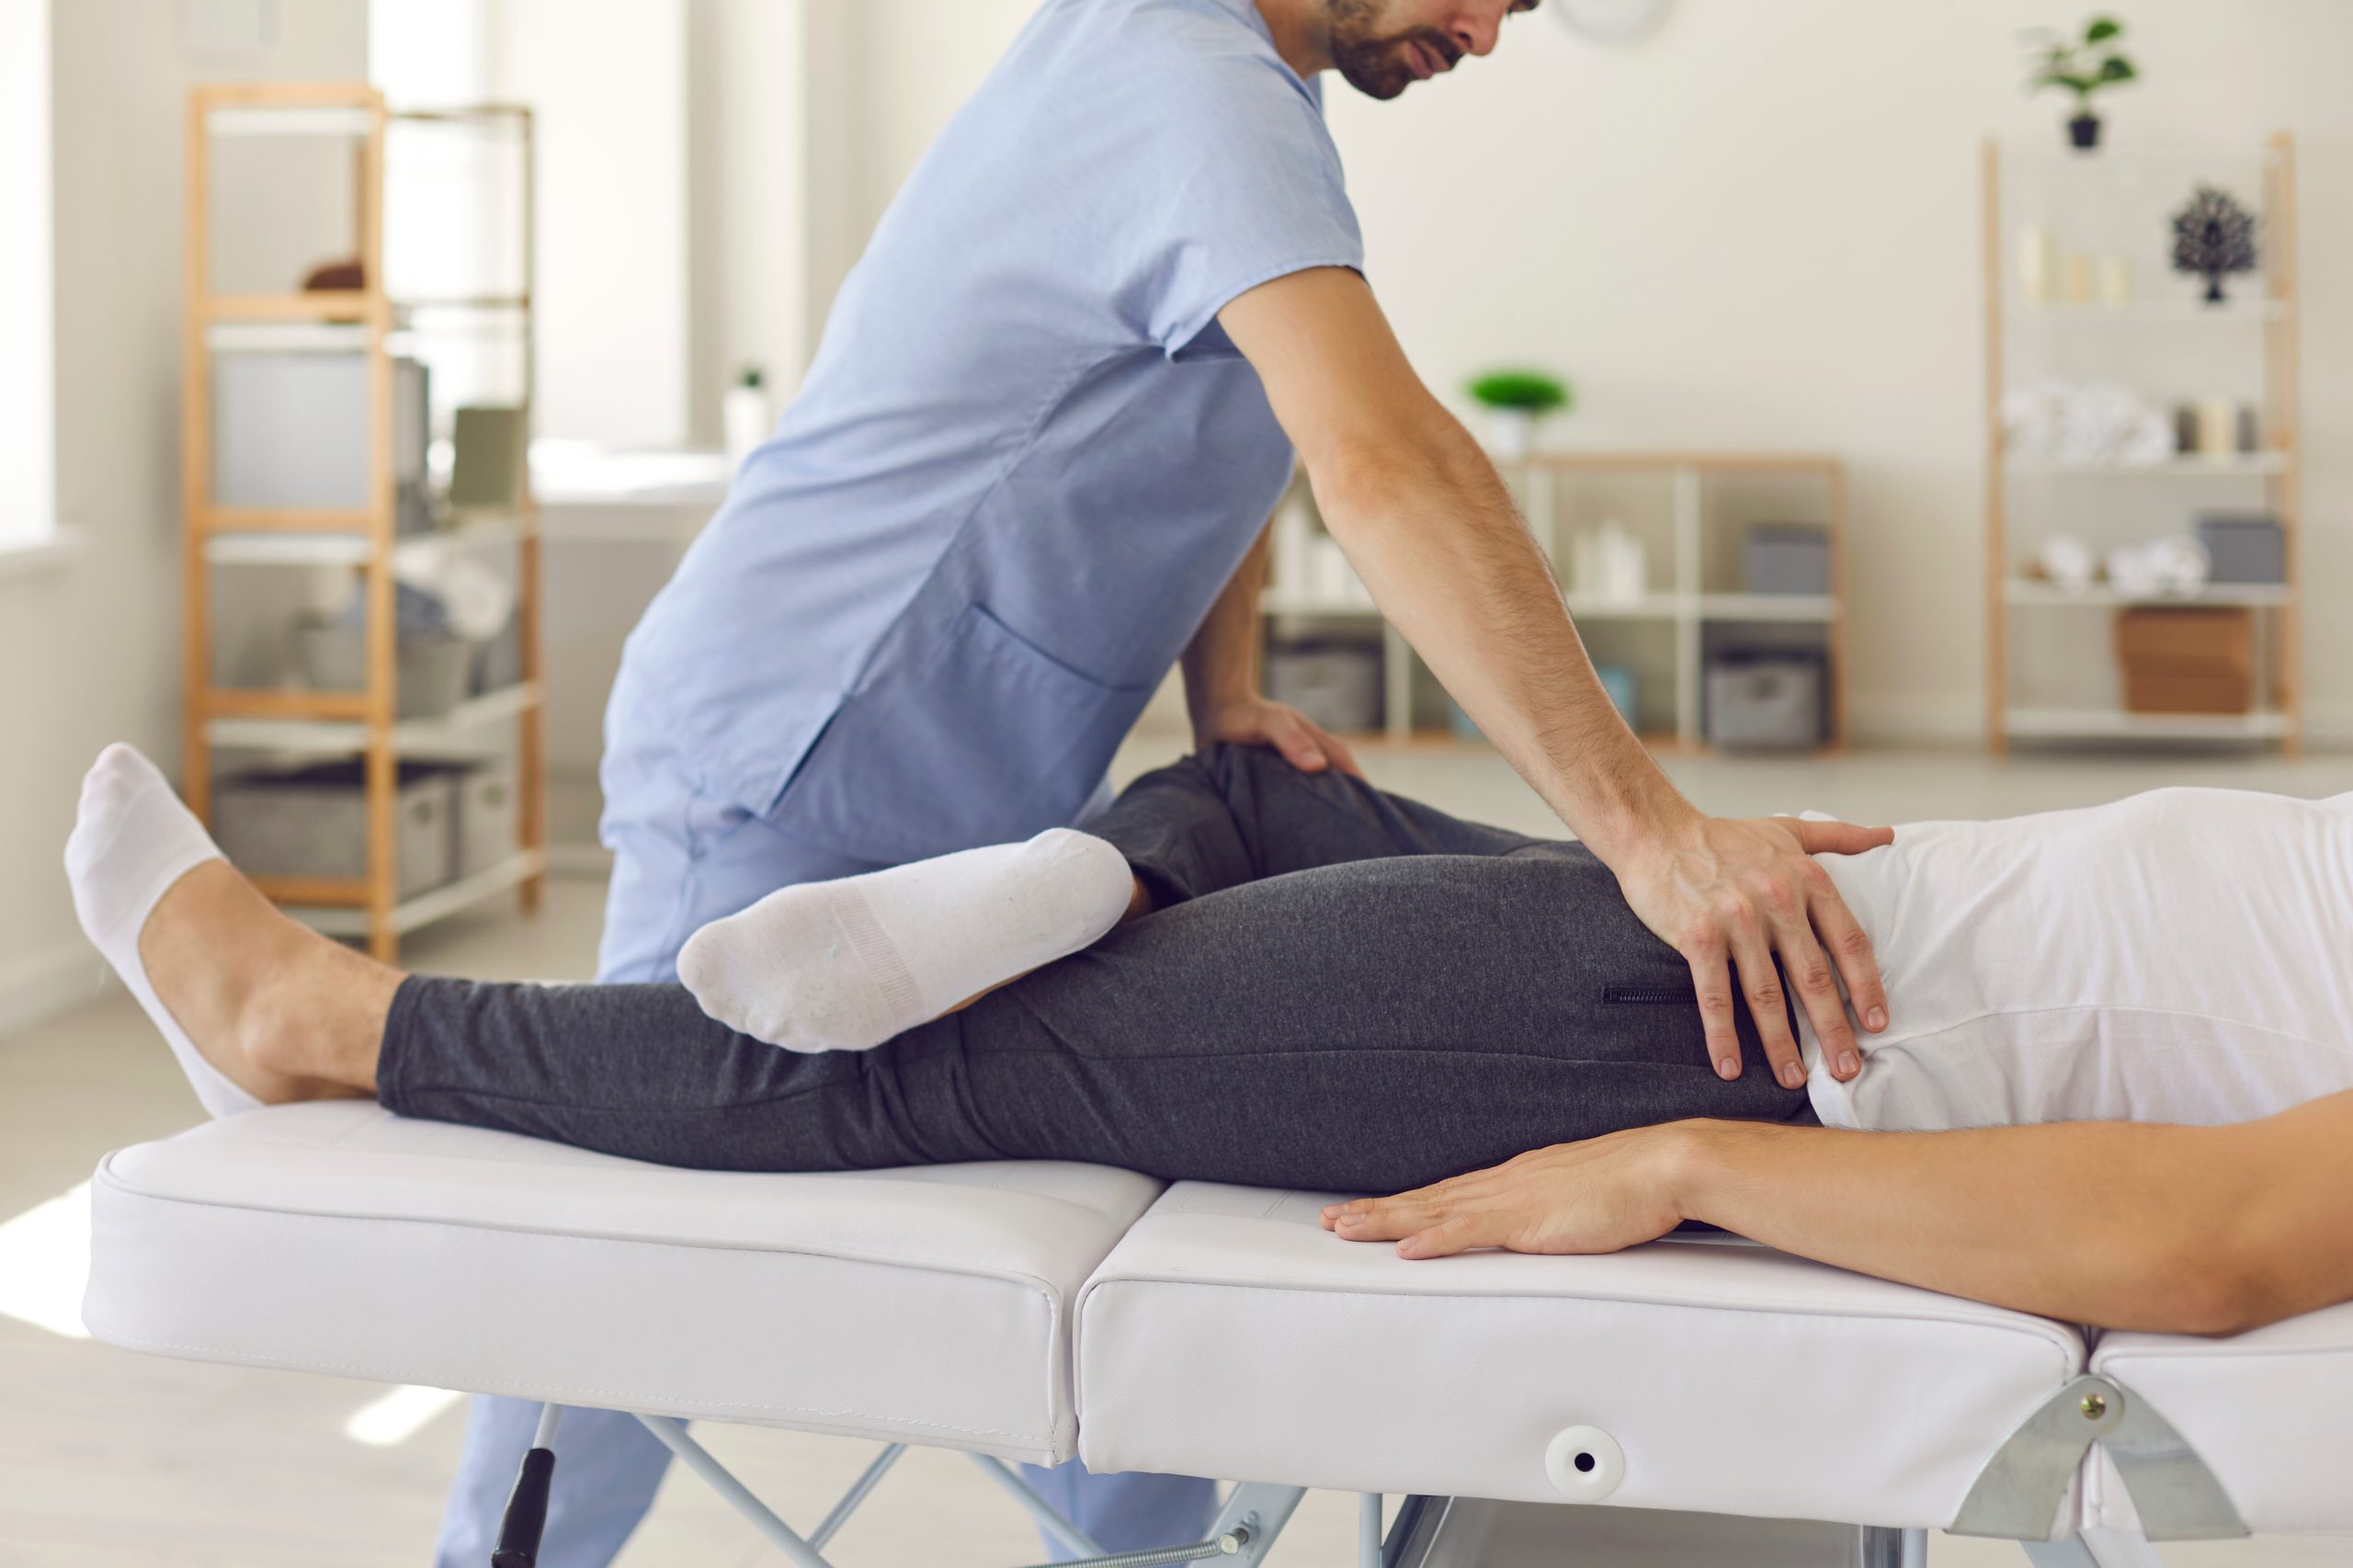 When should I stop going to physiotherapy?